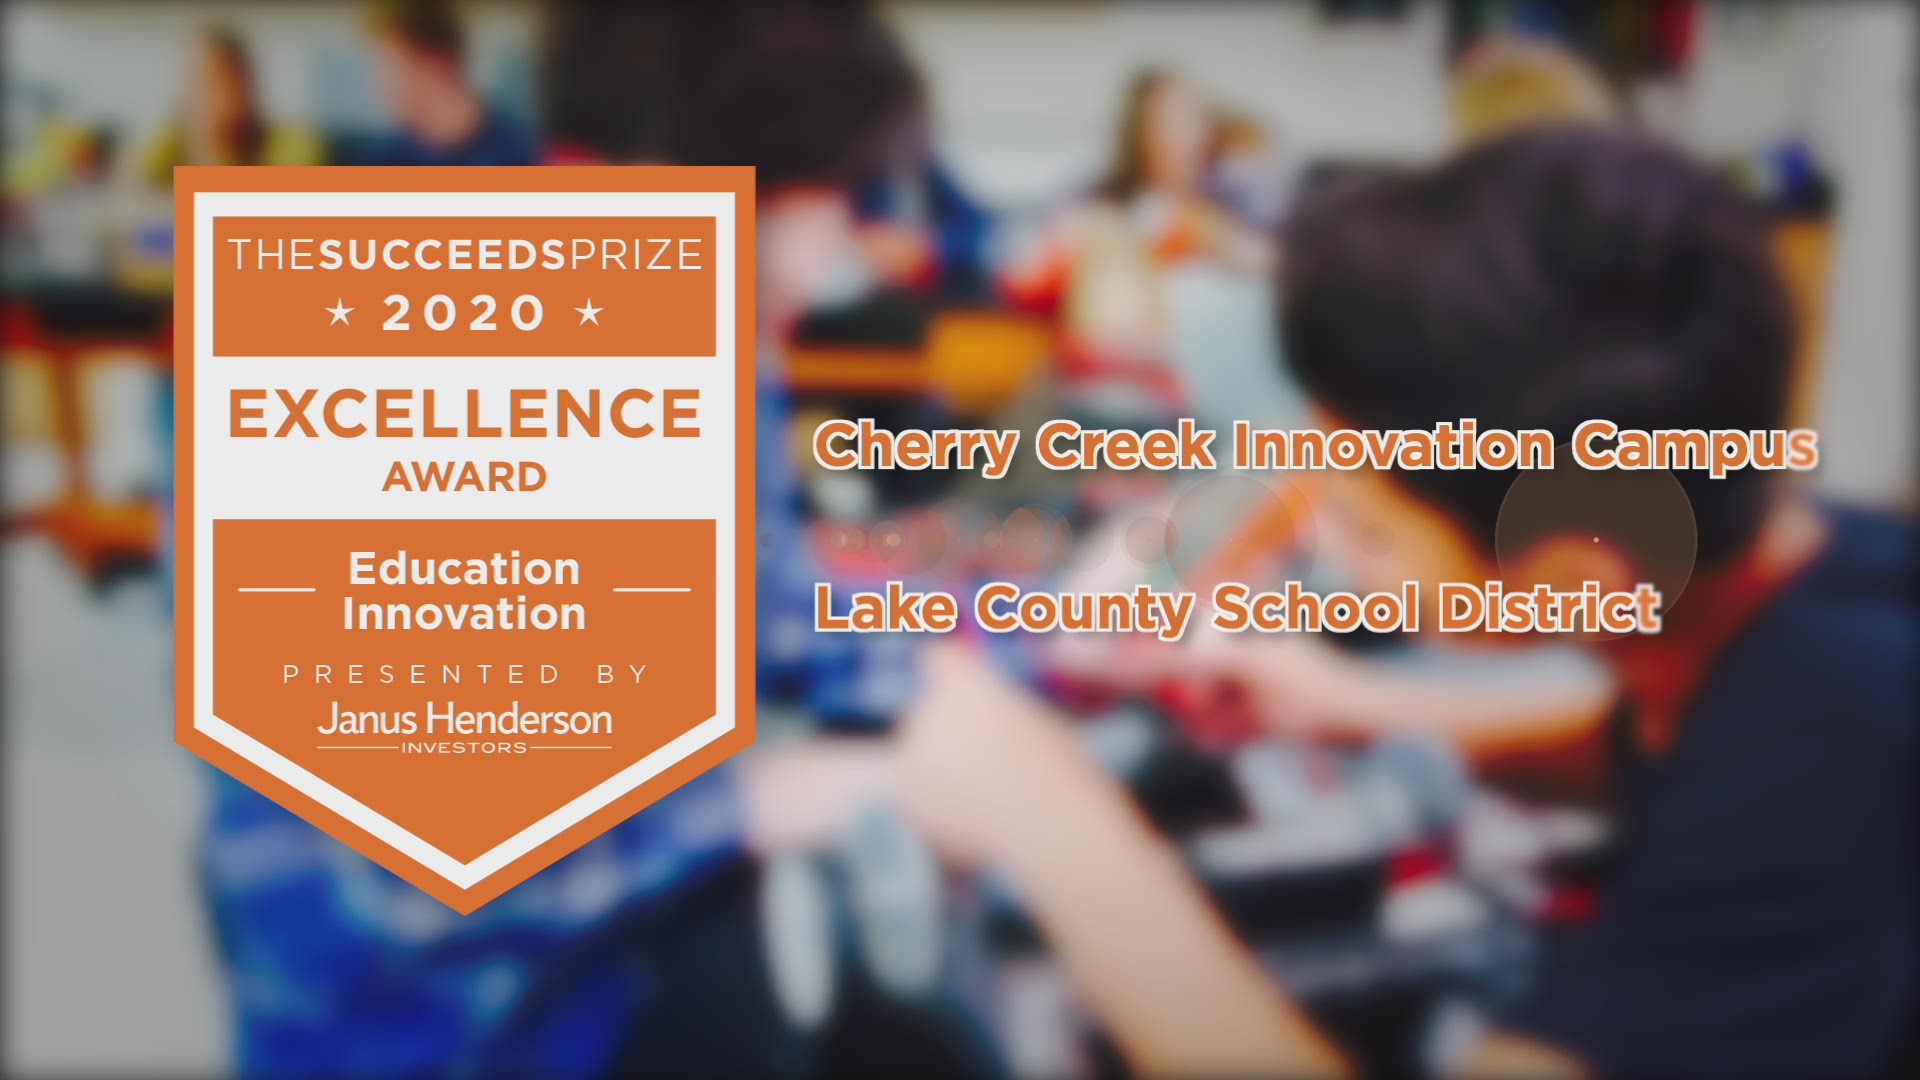 The Cherry Creek Innovation Center won the 2020 Succeeds Prize for Excellence in Education Innovation.